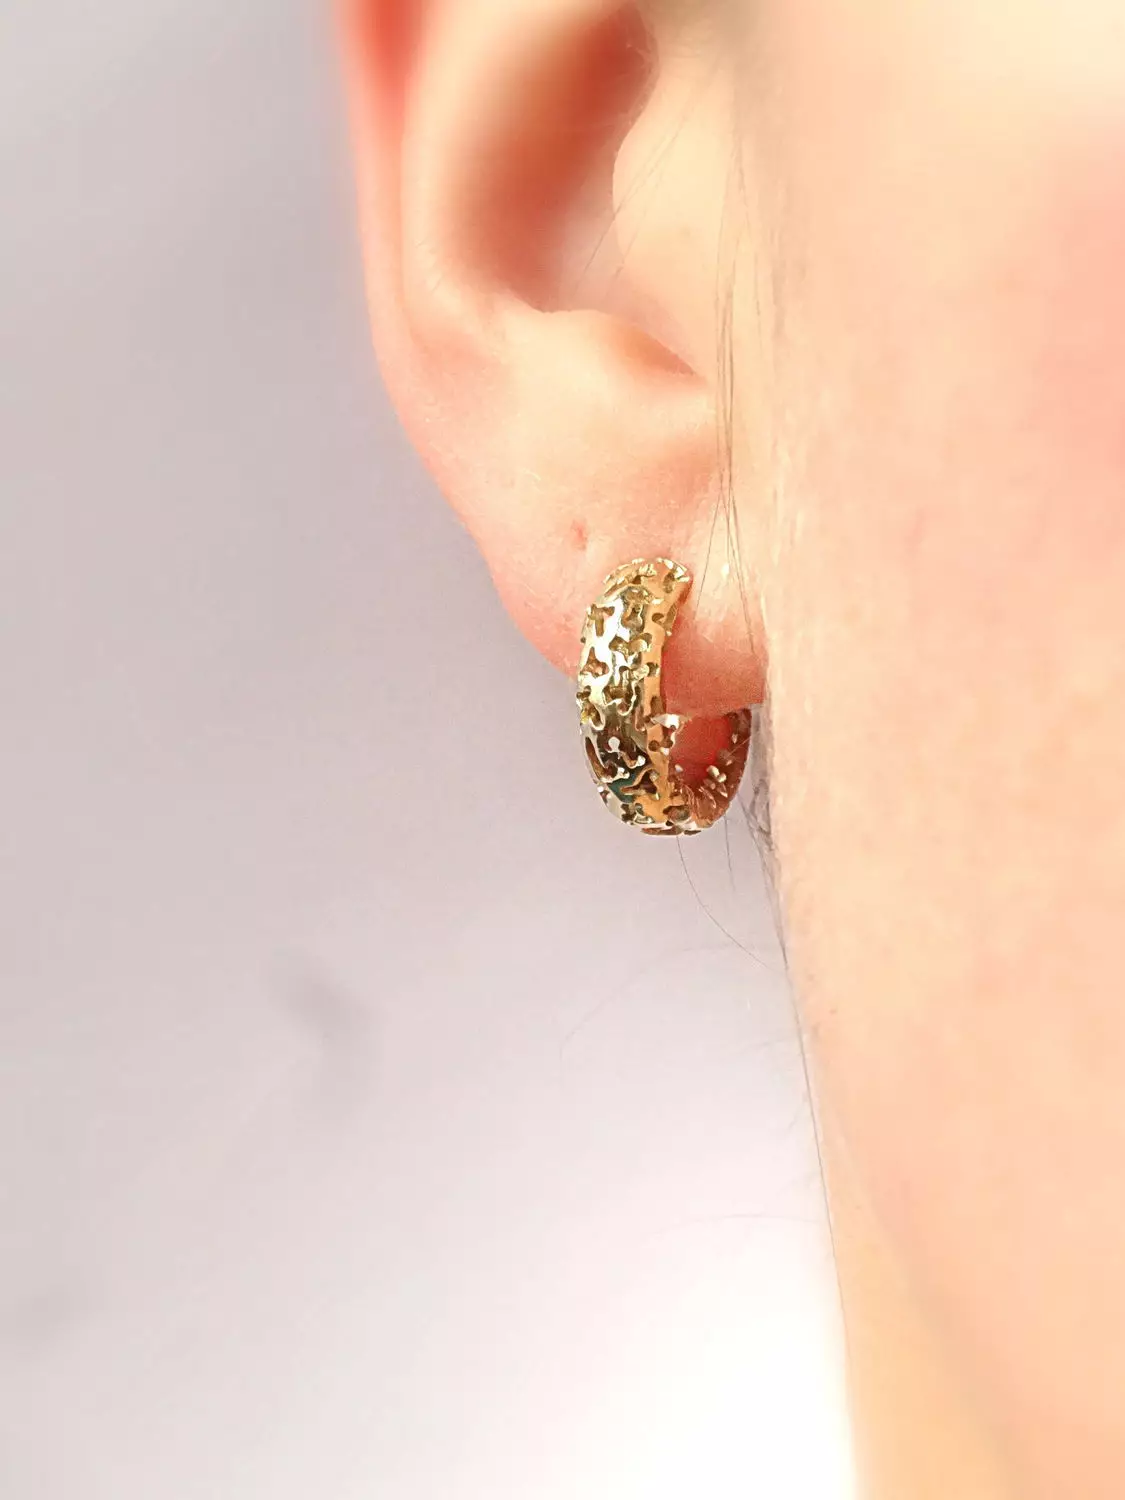 Gold earrings (137 photos): Fashion earrings 2021 in the form of cats, rings, butterflies and nose for women with pearl and yellow gold 3317_133